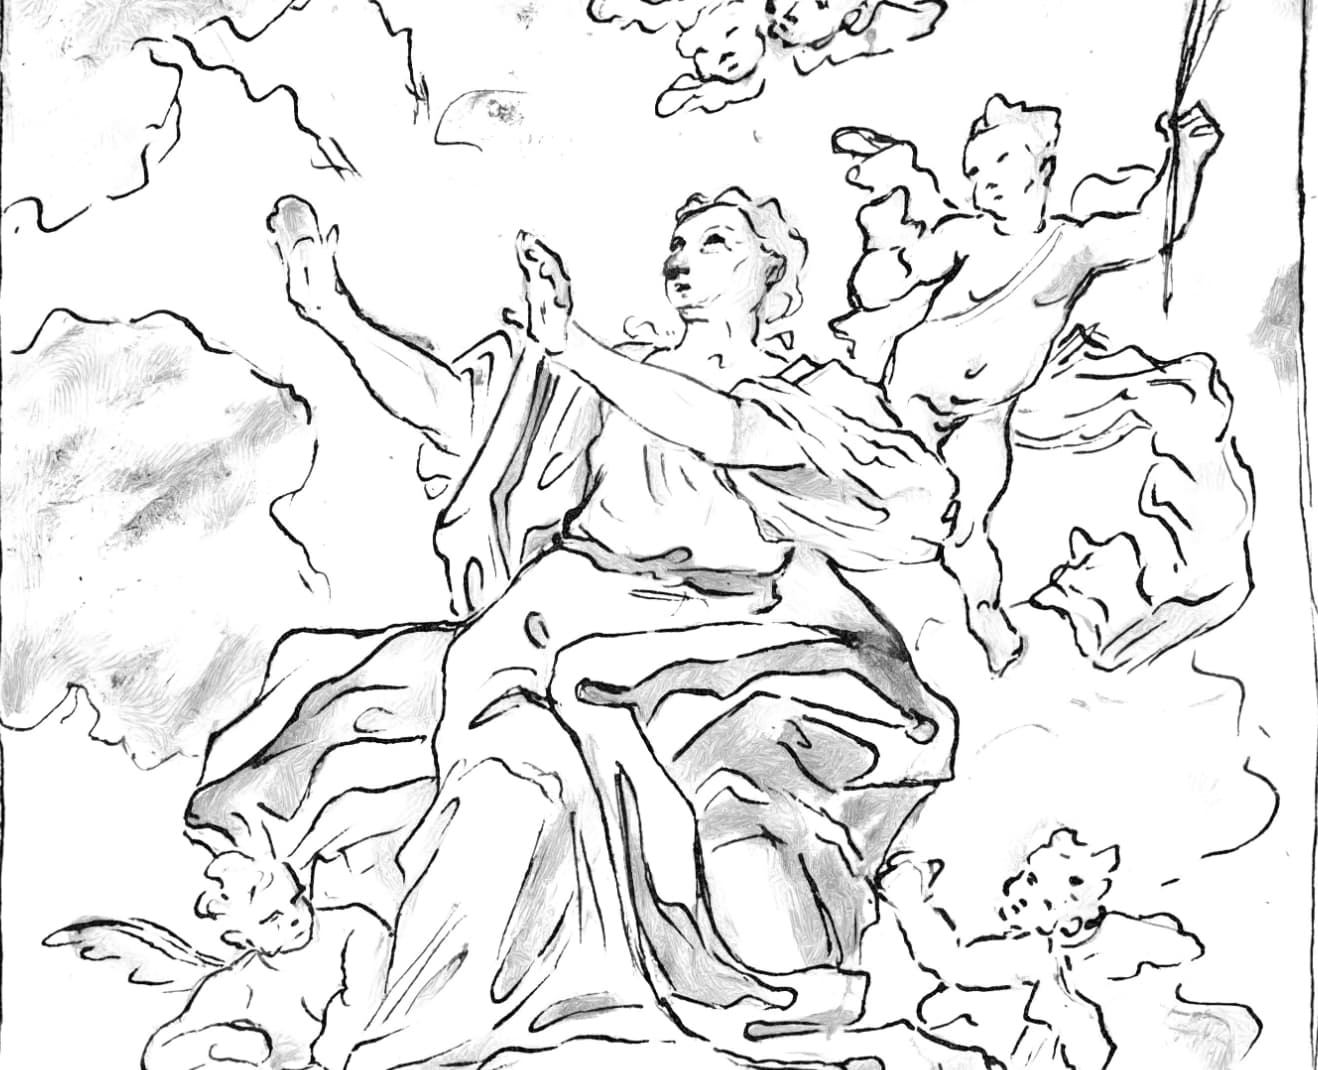 Assumption of the Virgin Mary (1657-1745) by Martino Altomonte - Catholic Coloring Page